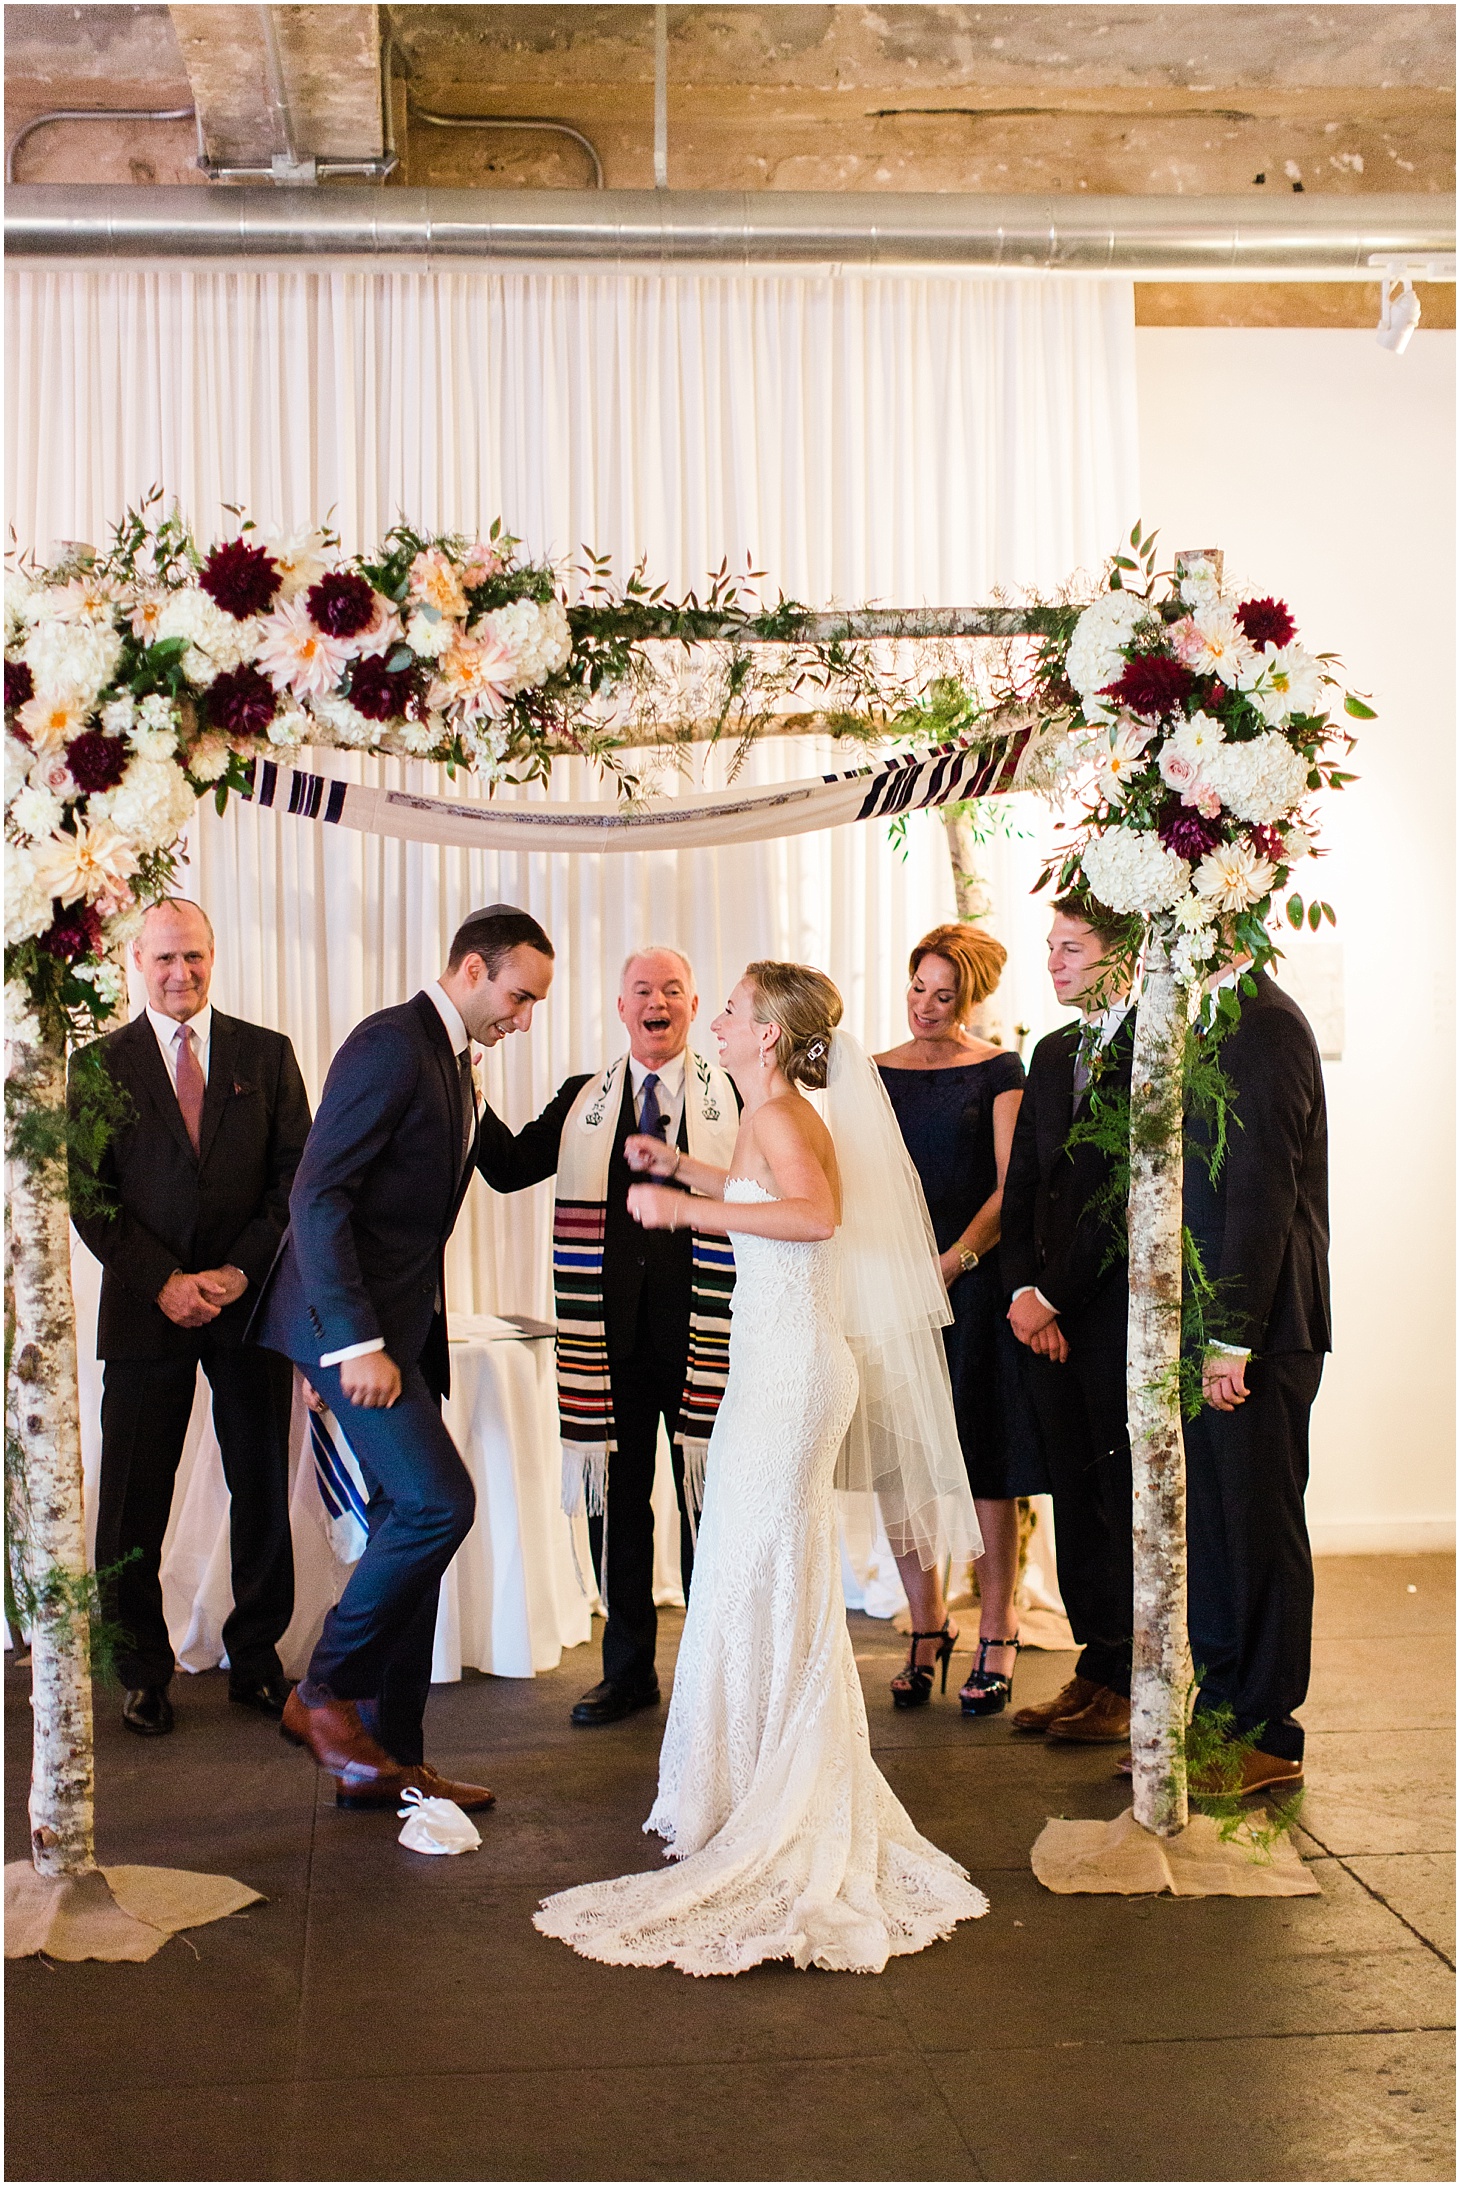 Jewish Wedding Ceremony at Long View Gallery, Industrial-Chic Wedding in DC, Sarah Bradshaw Photography, DC Wedding Photographer